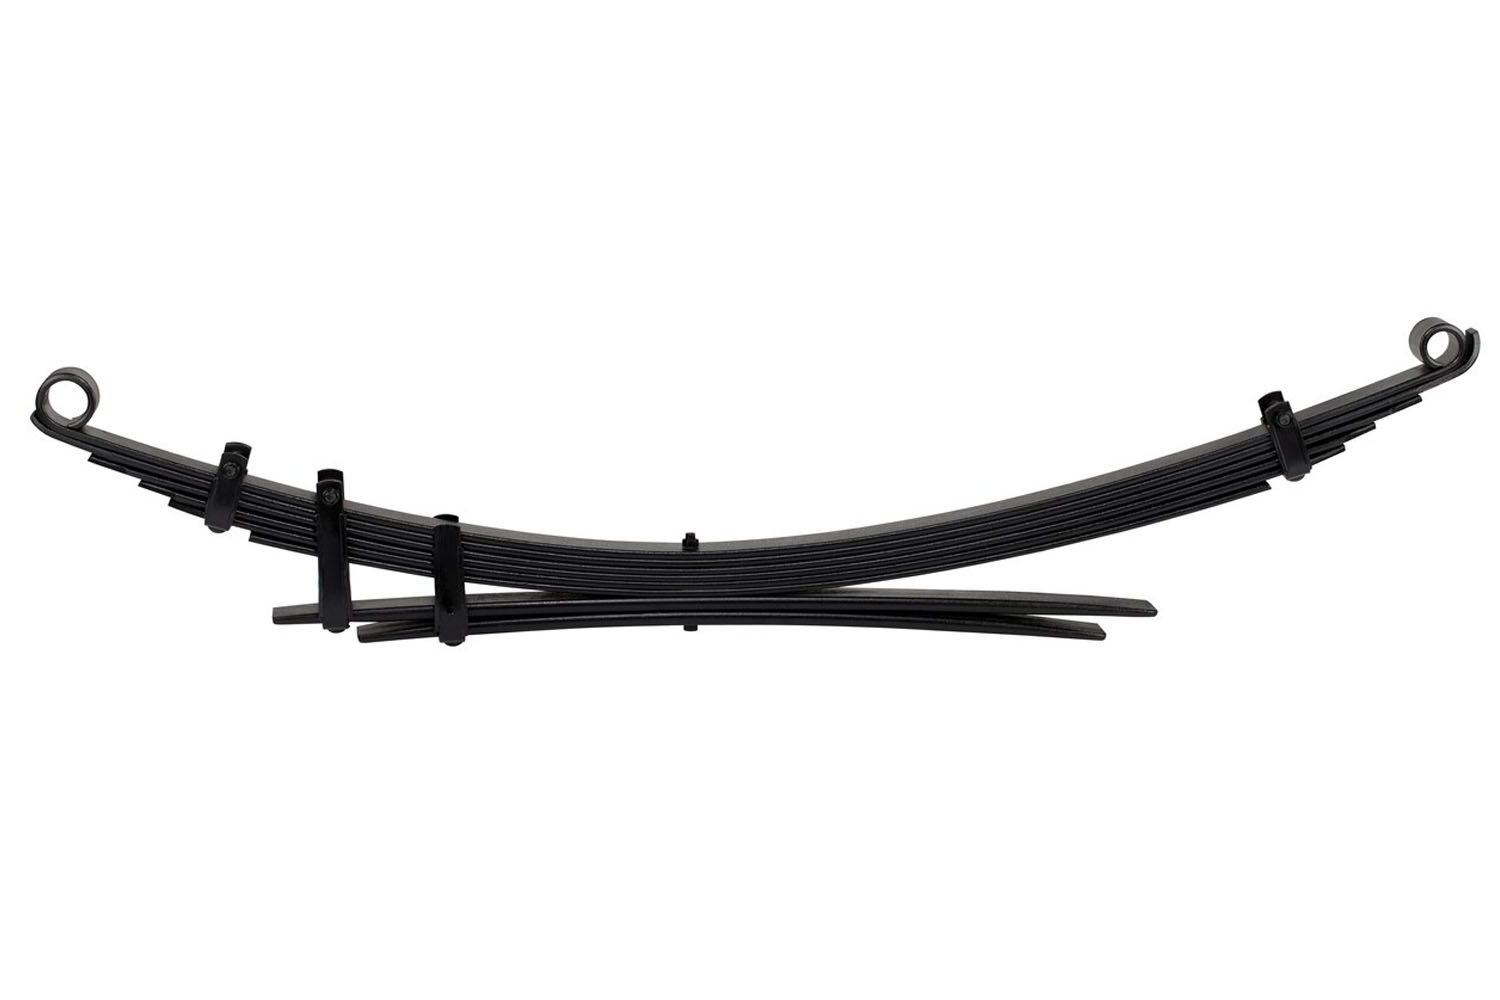 Rear Leaf Spring - Heavy Load (660-1100LBS) Suited For Nissan Frontier/Navara D40 Questions & Answers